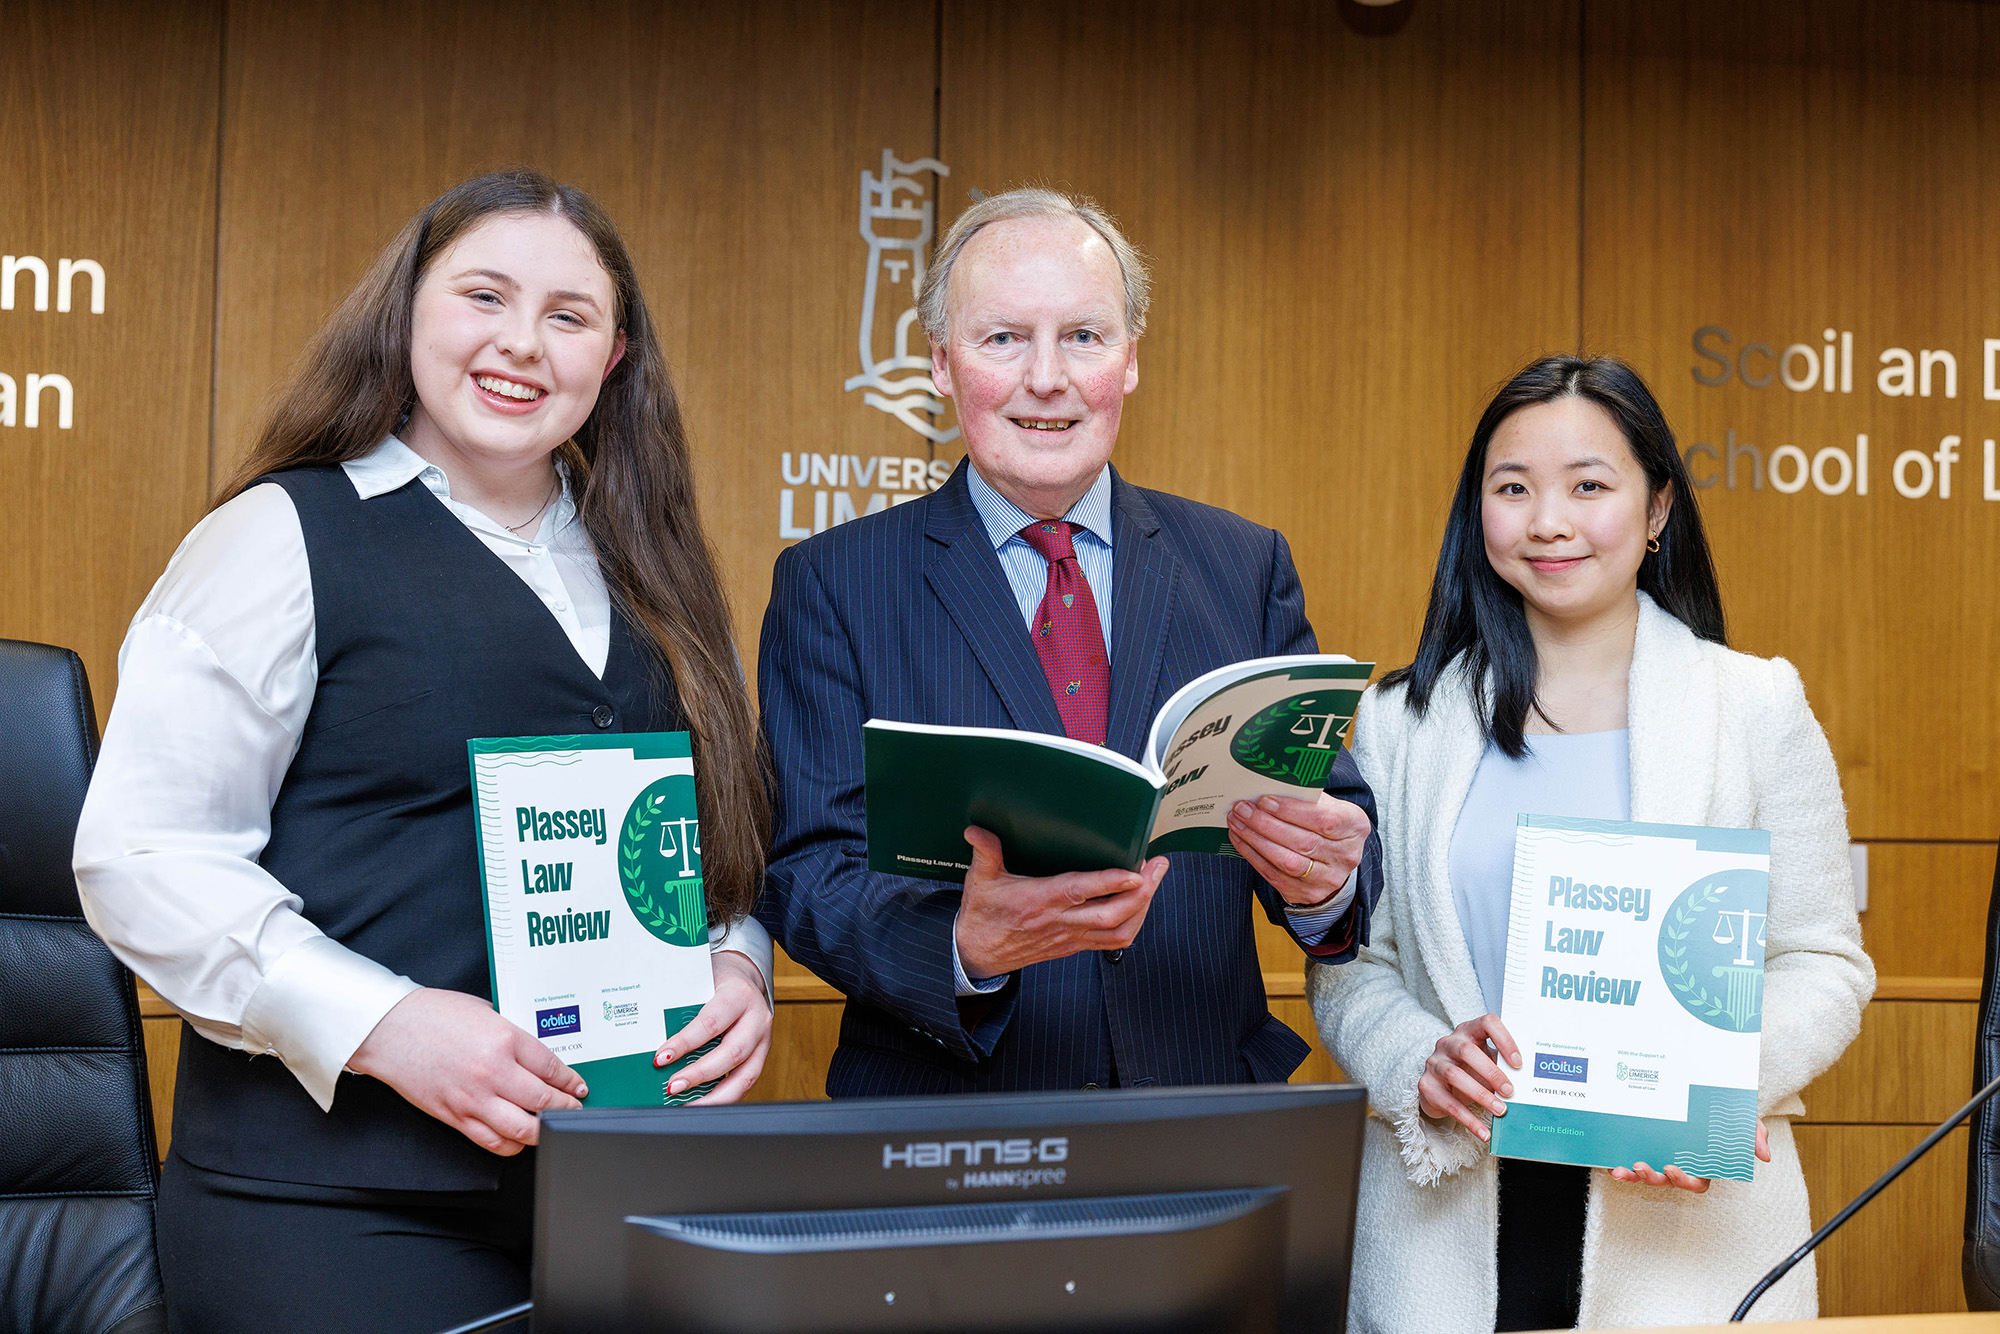 Latest edition of Plassey Law Review launched by Judge Tom O'Donnell